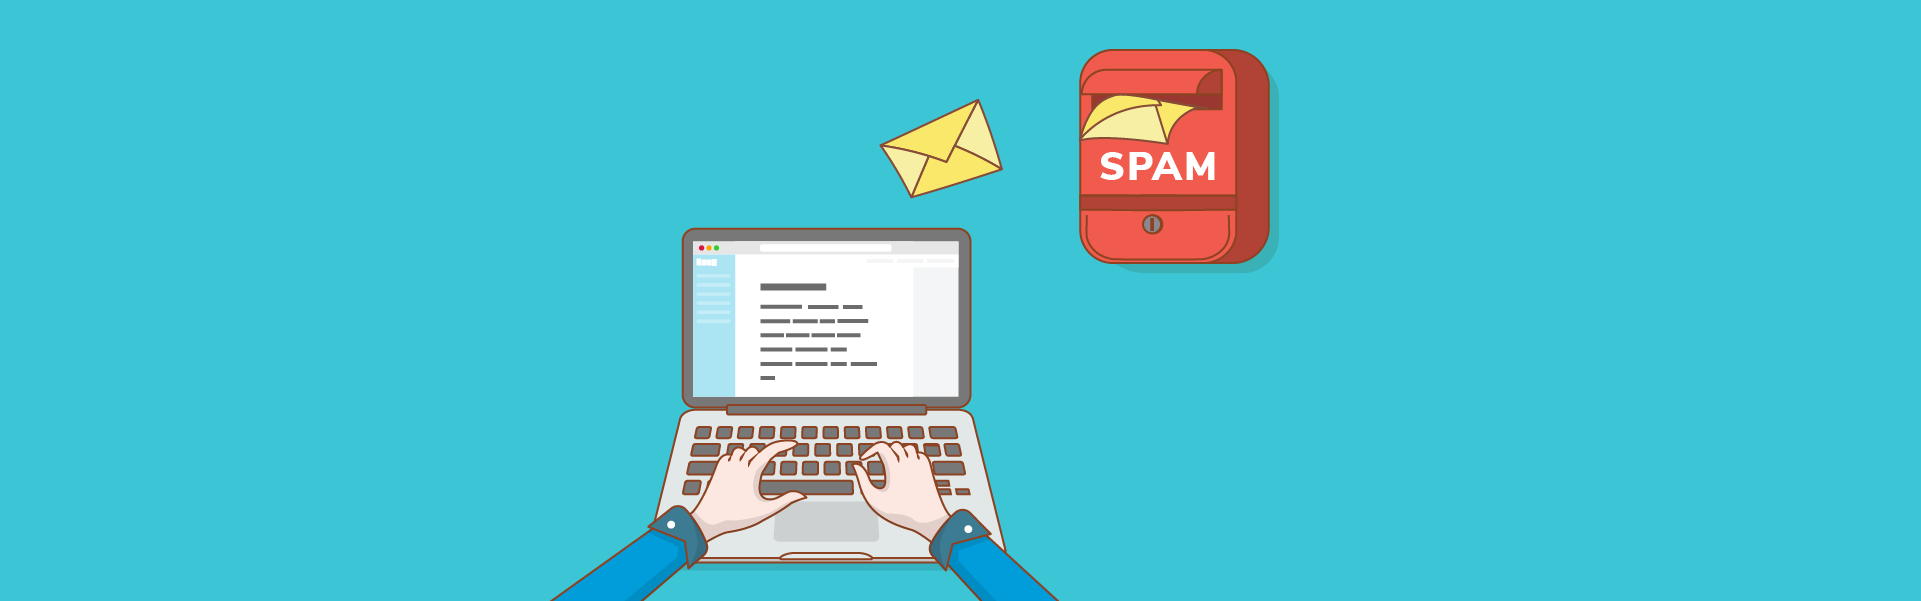 How to Prevent Emails from Going to Spam: The Ultimate Guide